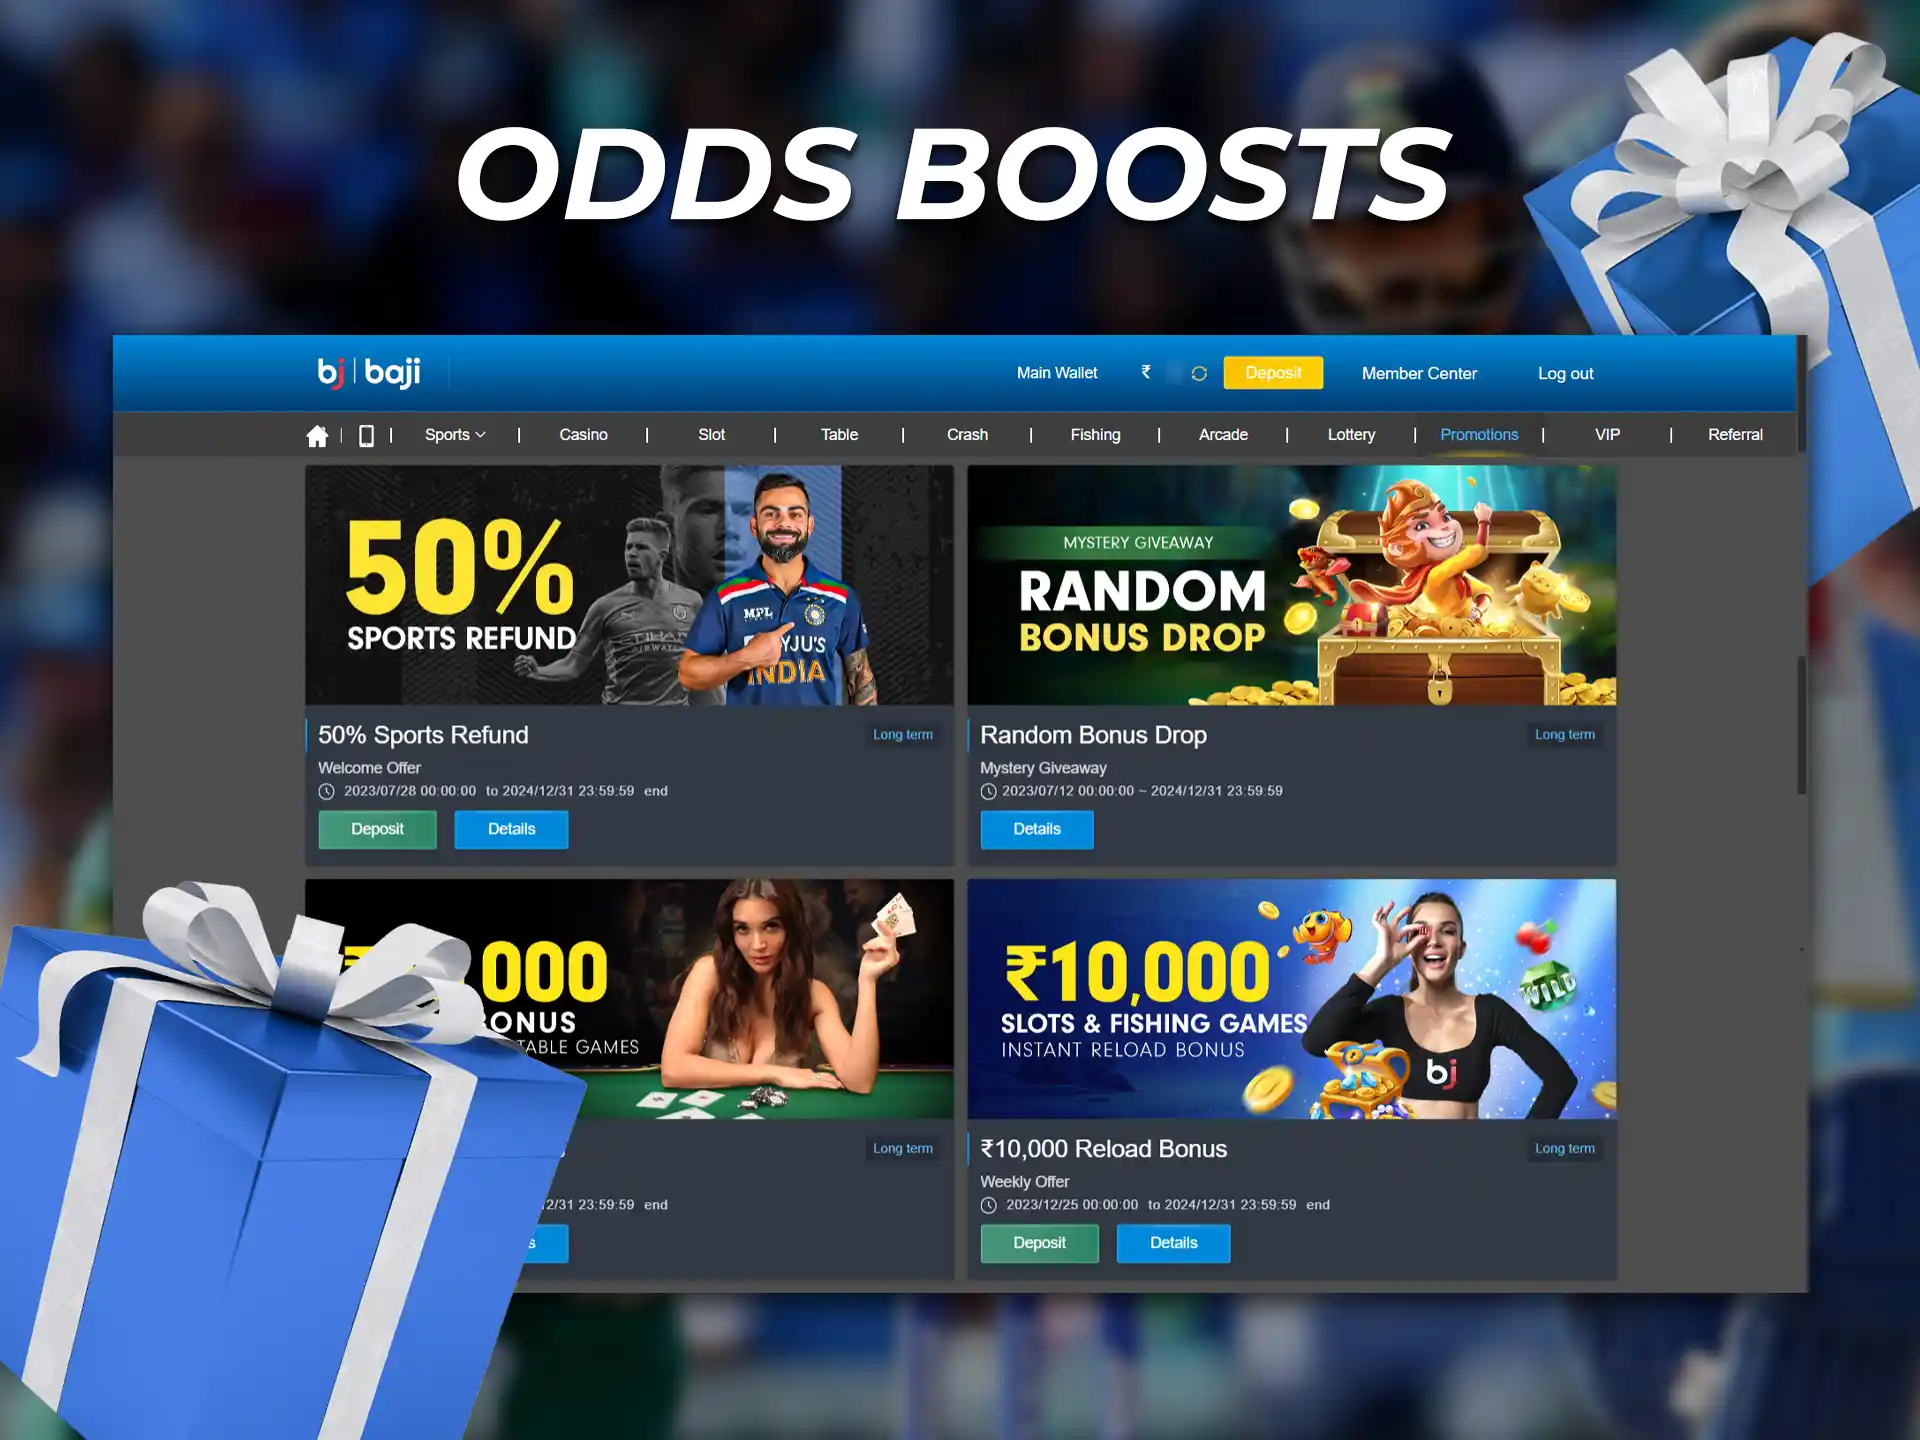 Check out the odds boost on the new betting sites.